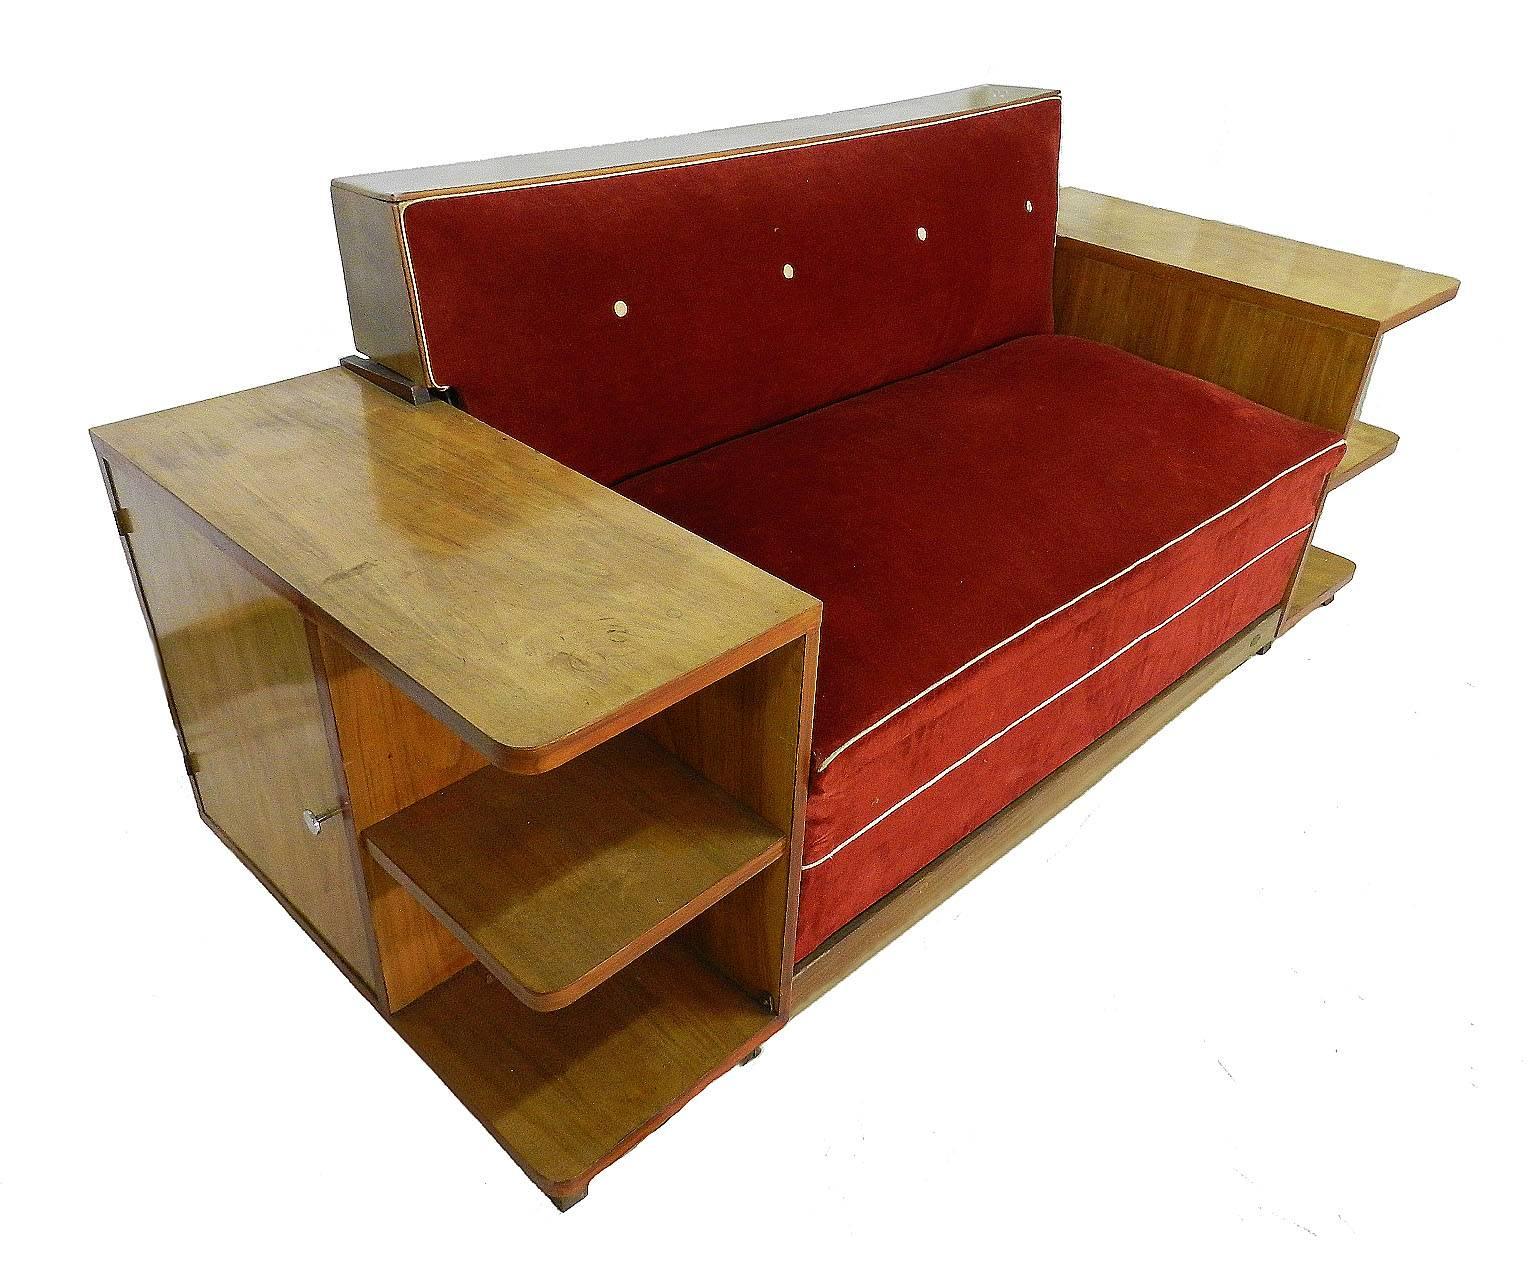 Art Deco sofa French walnut canapé bed
Sofa bed with integrated cabinets and shelves
Pale walnut good patina 
This opens up to a bed with room for a soft mattress
Dismantles for shipping and placing in situ.
Free Shipping Options available 
We will